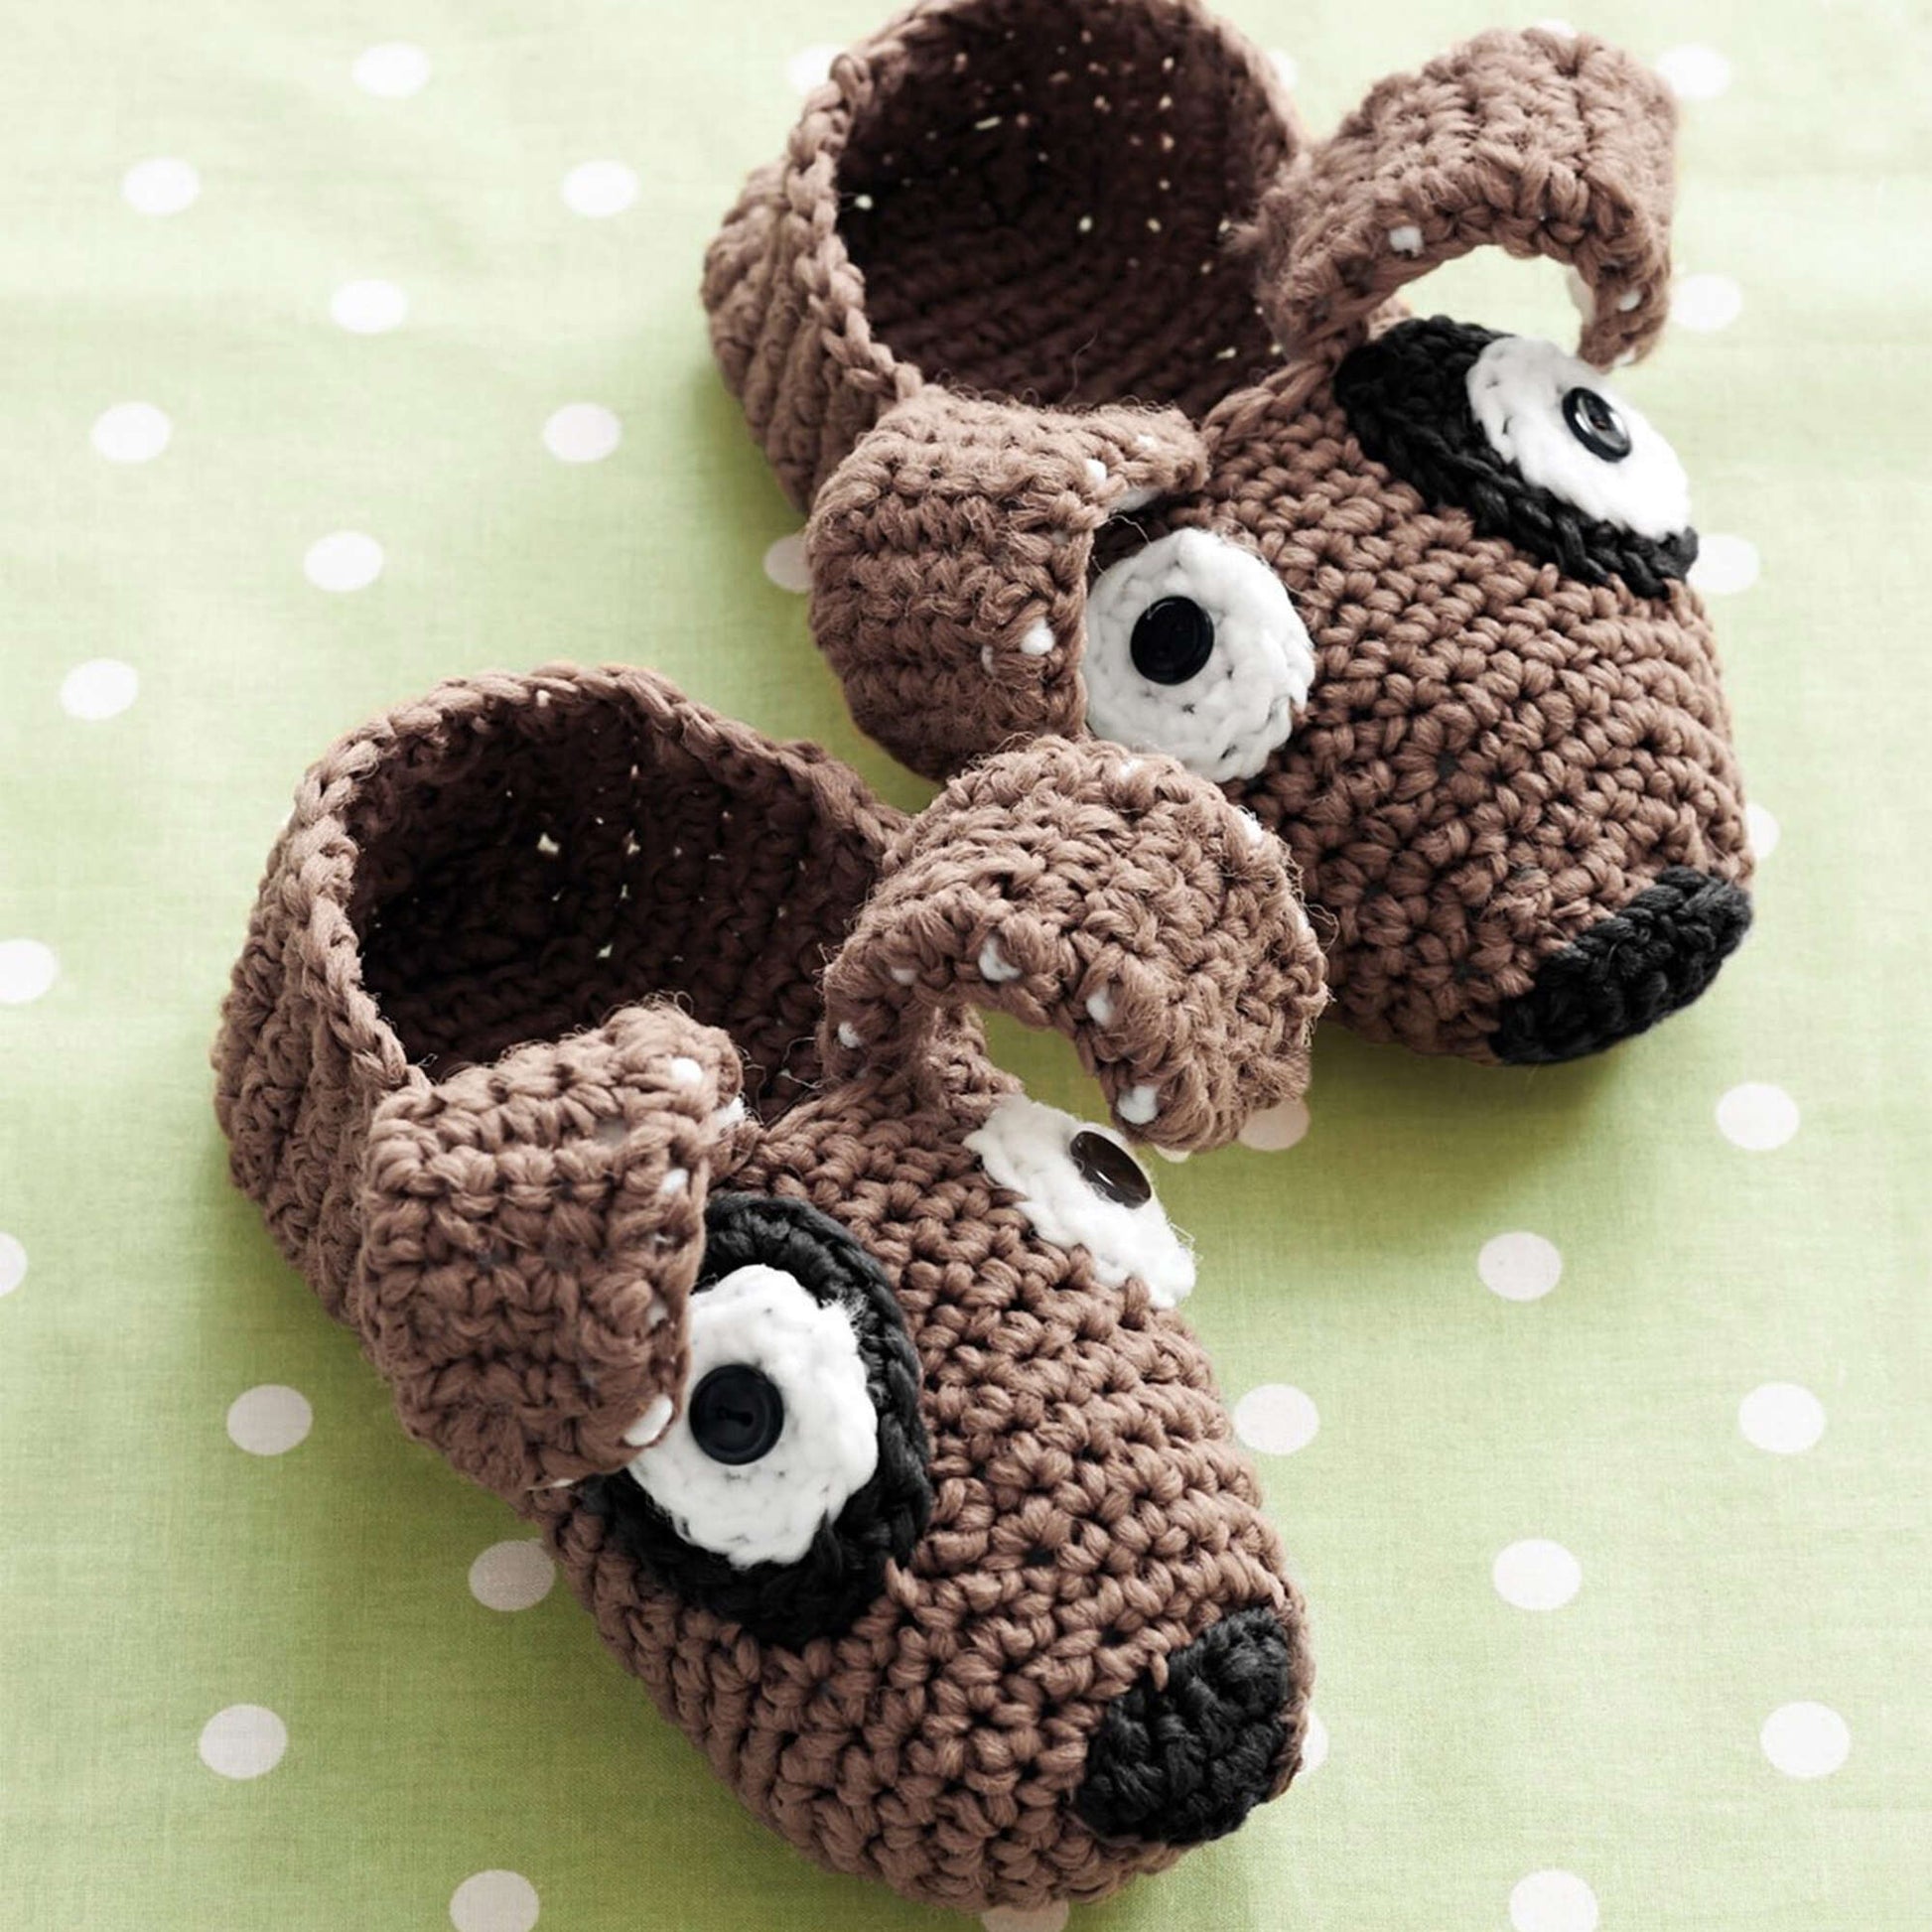 Phentex Puppy Slippers Size 5-6